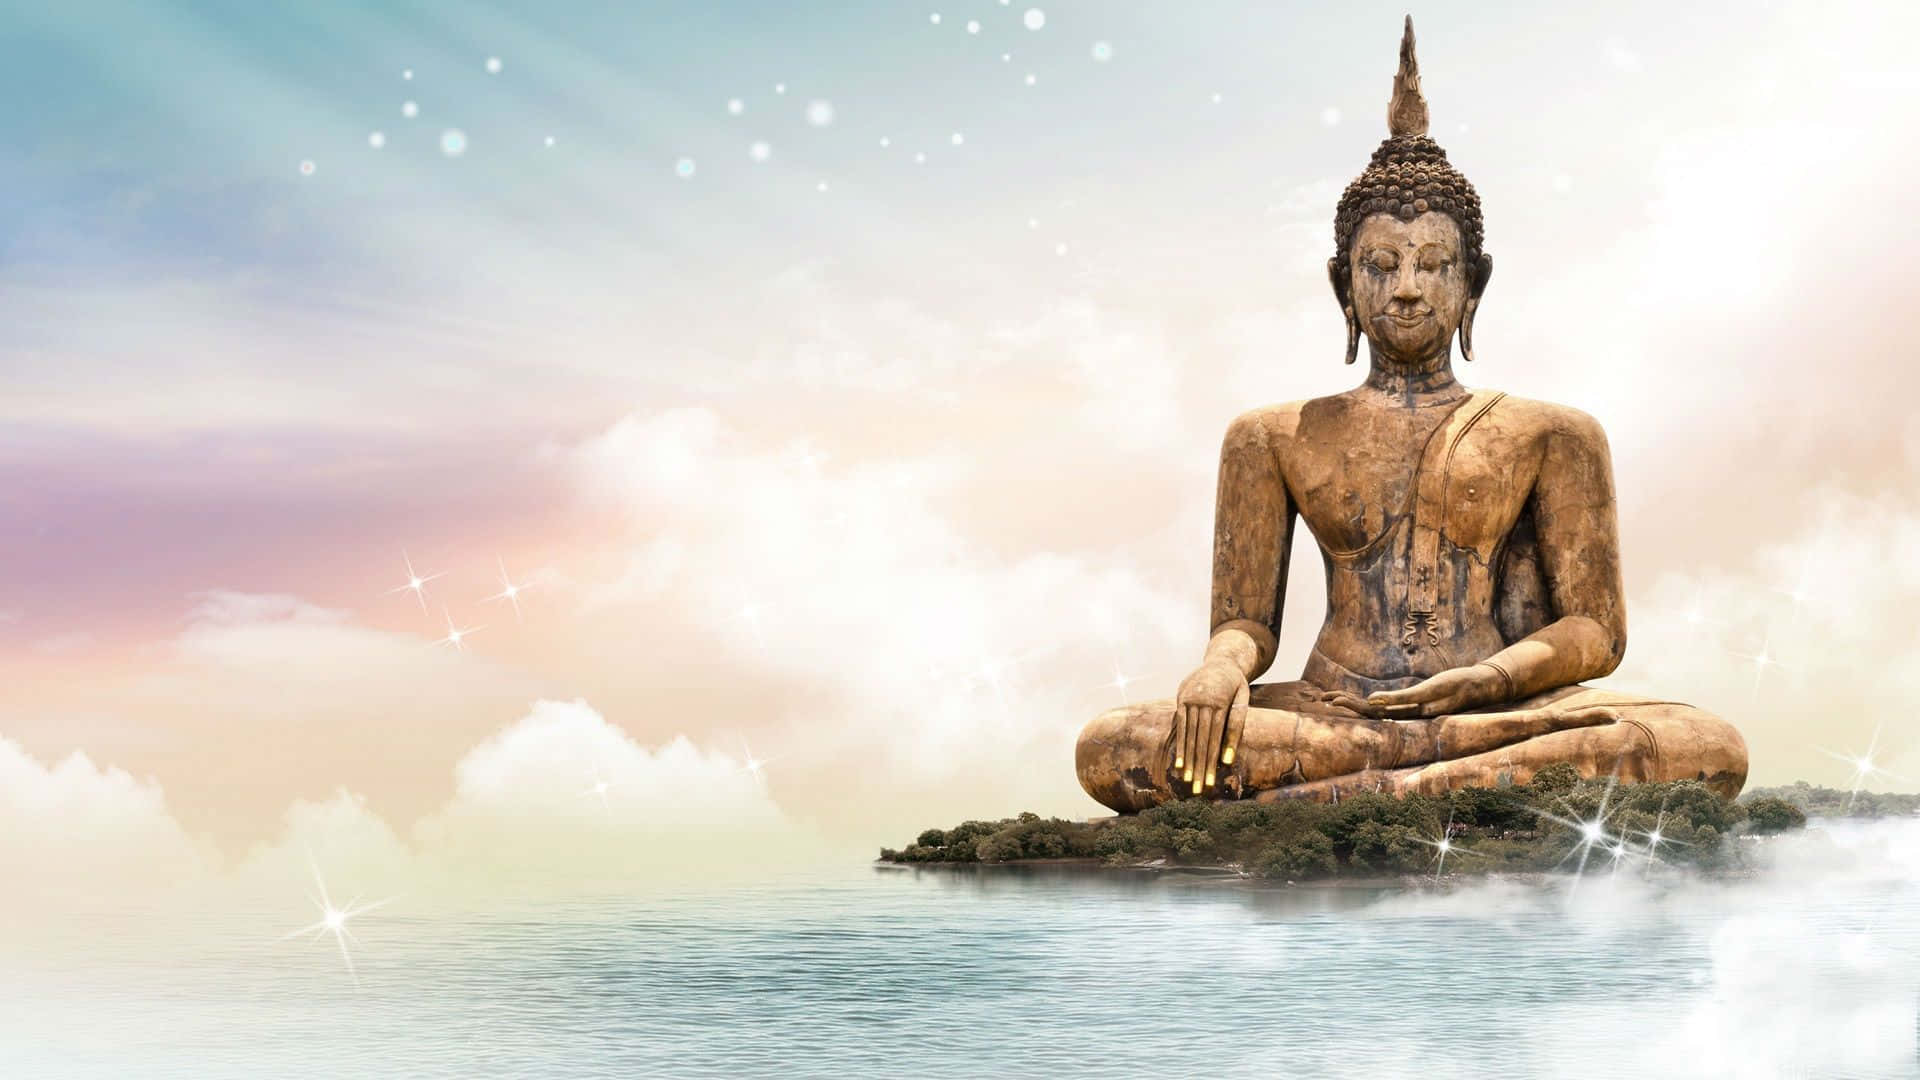 A Statue Of Buddha Sitting On An Island In The Water